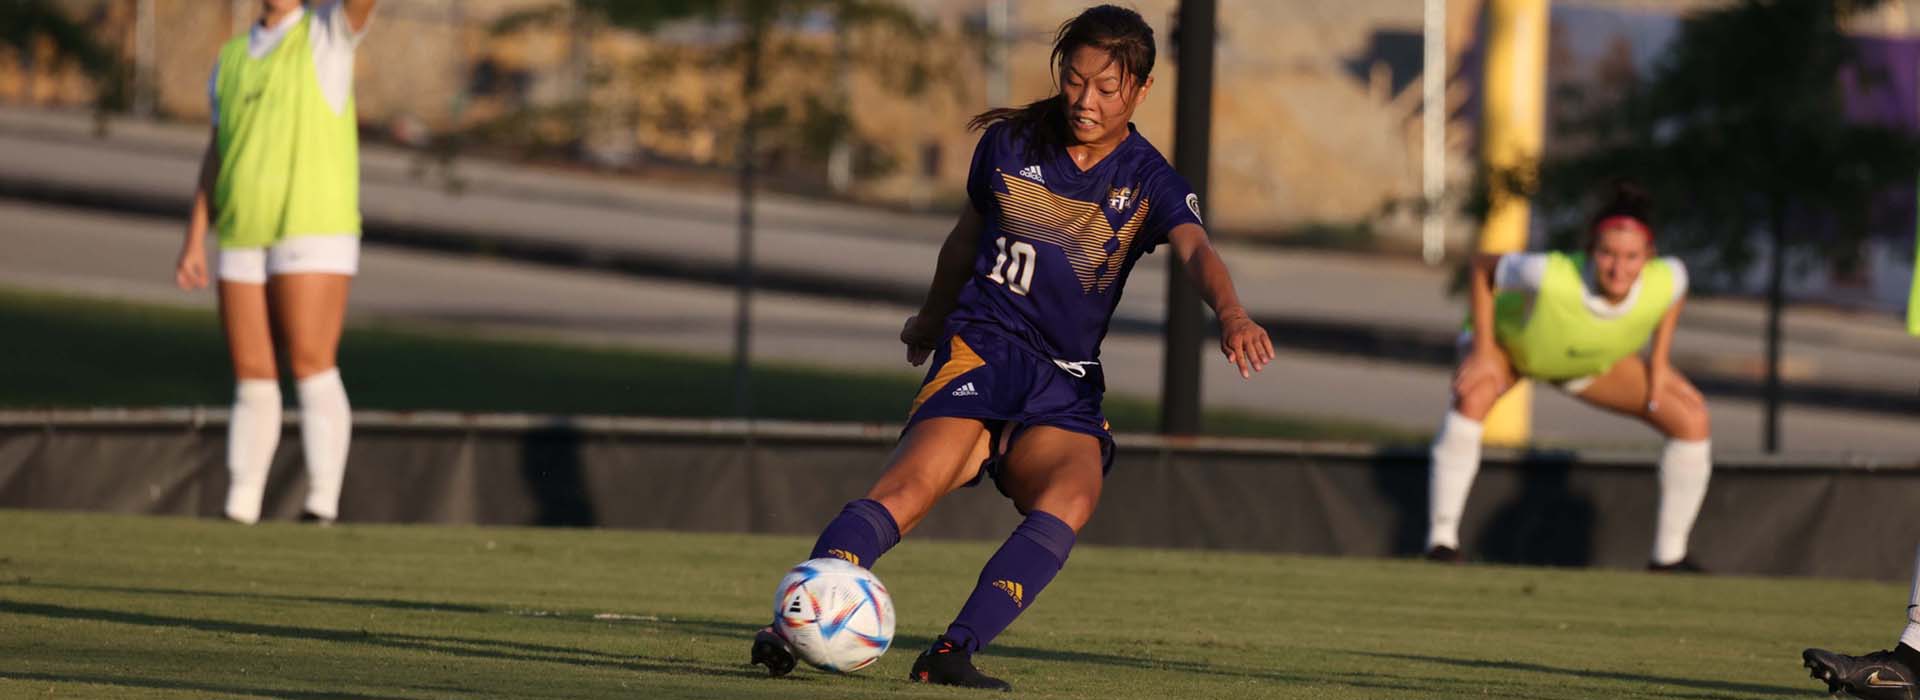 Golden Eagles travel to Tennessee for Sunday night clash in Knoxville